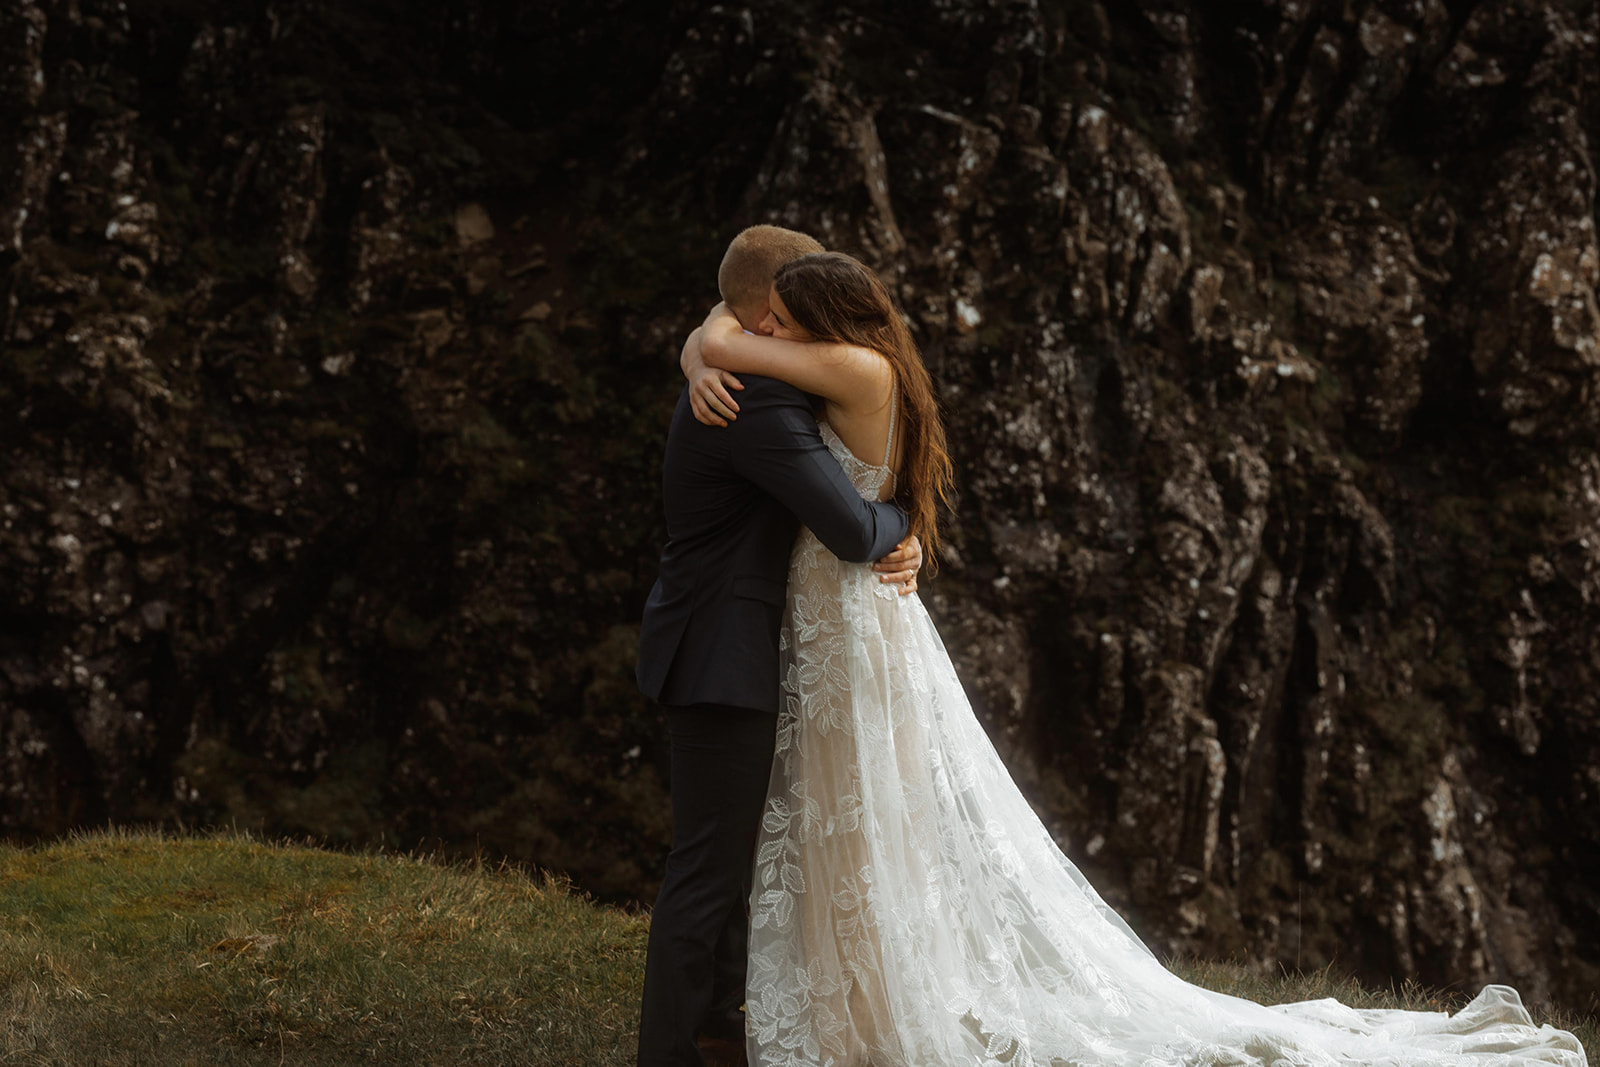 Emma and Matthew shared an intimate moment during their Isle of Skye elopement